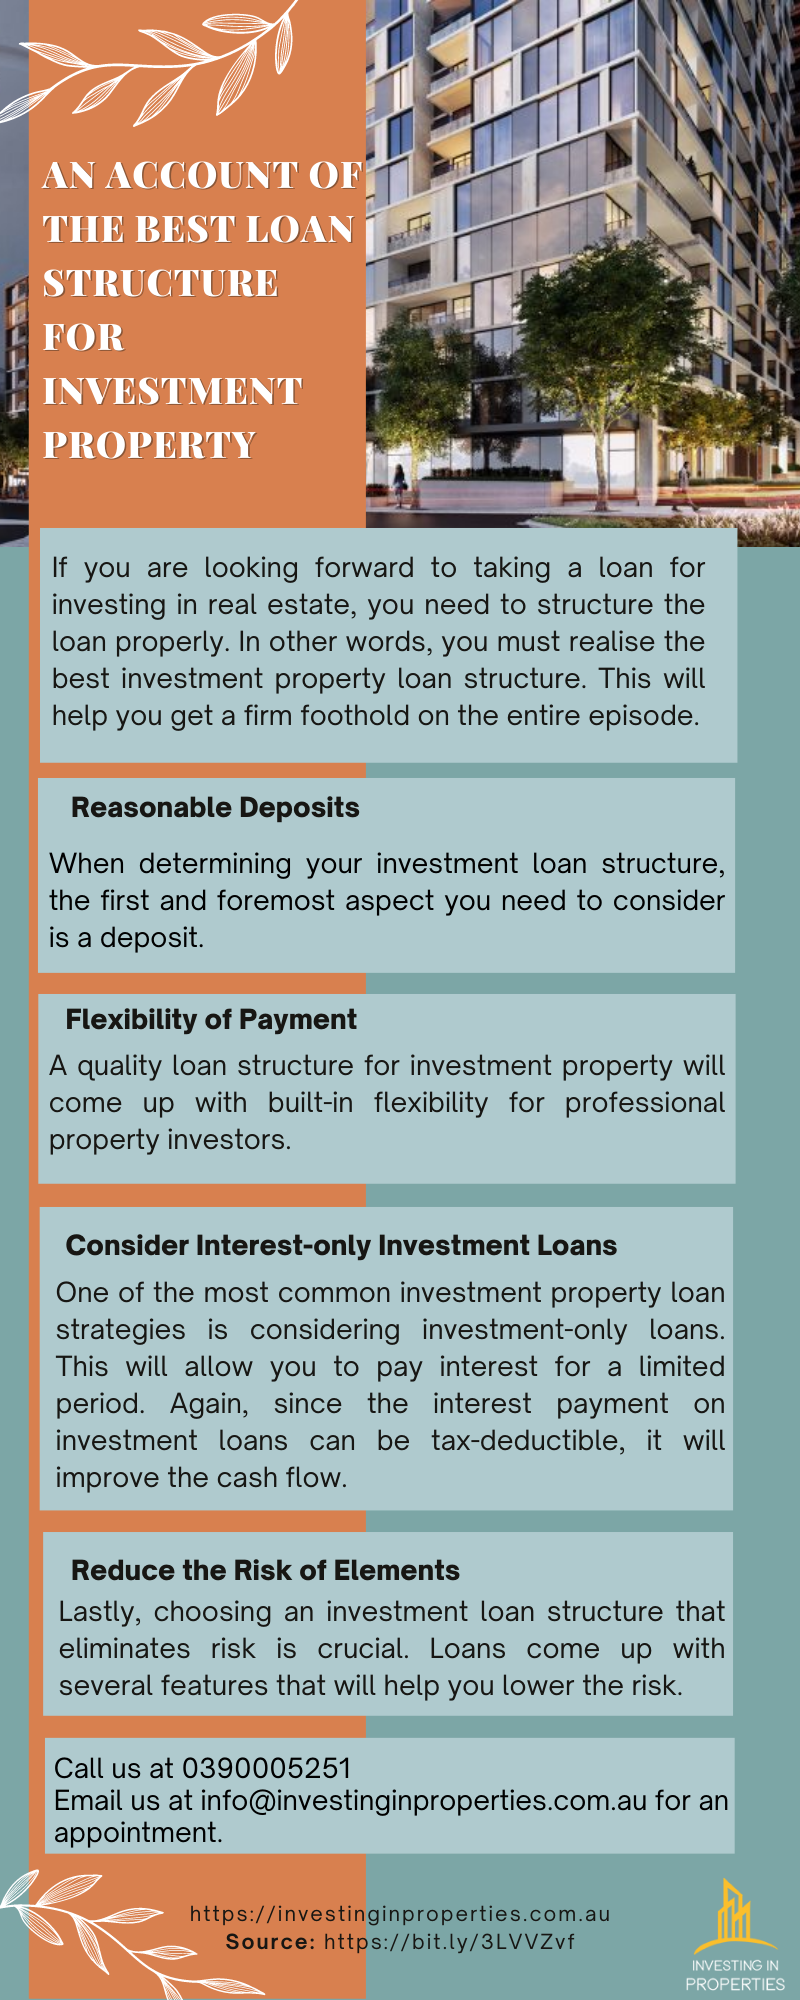 An Account of the Best Loan Structure for Investment Property